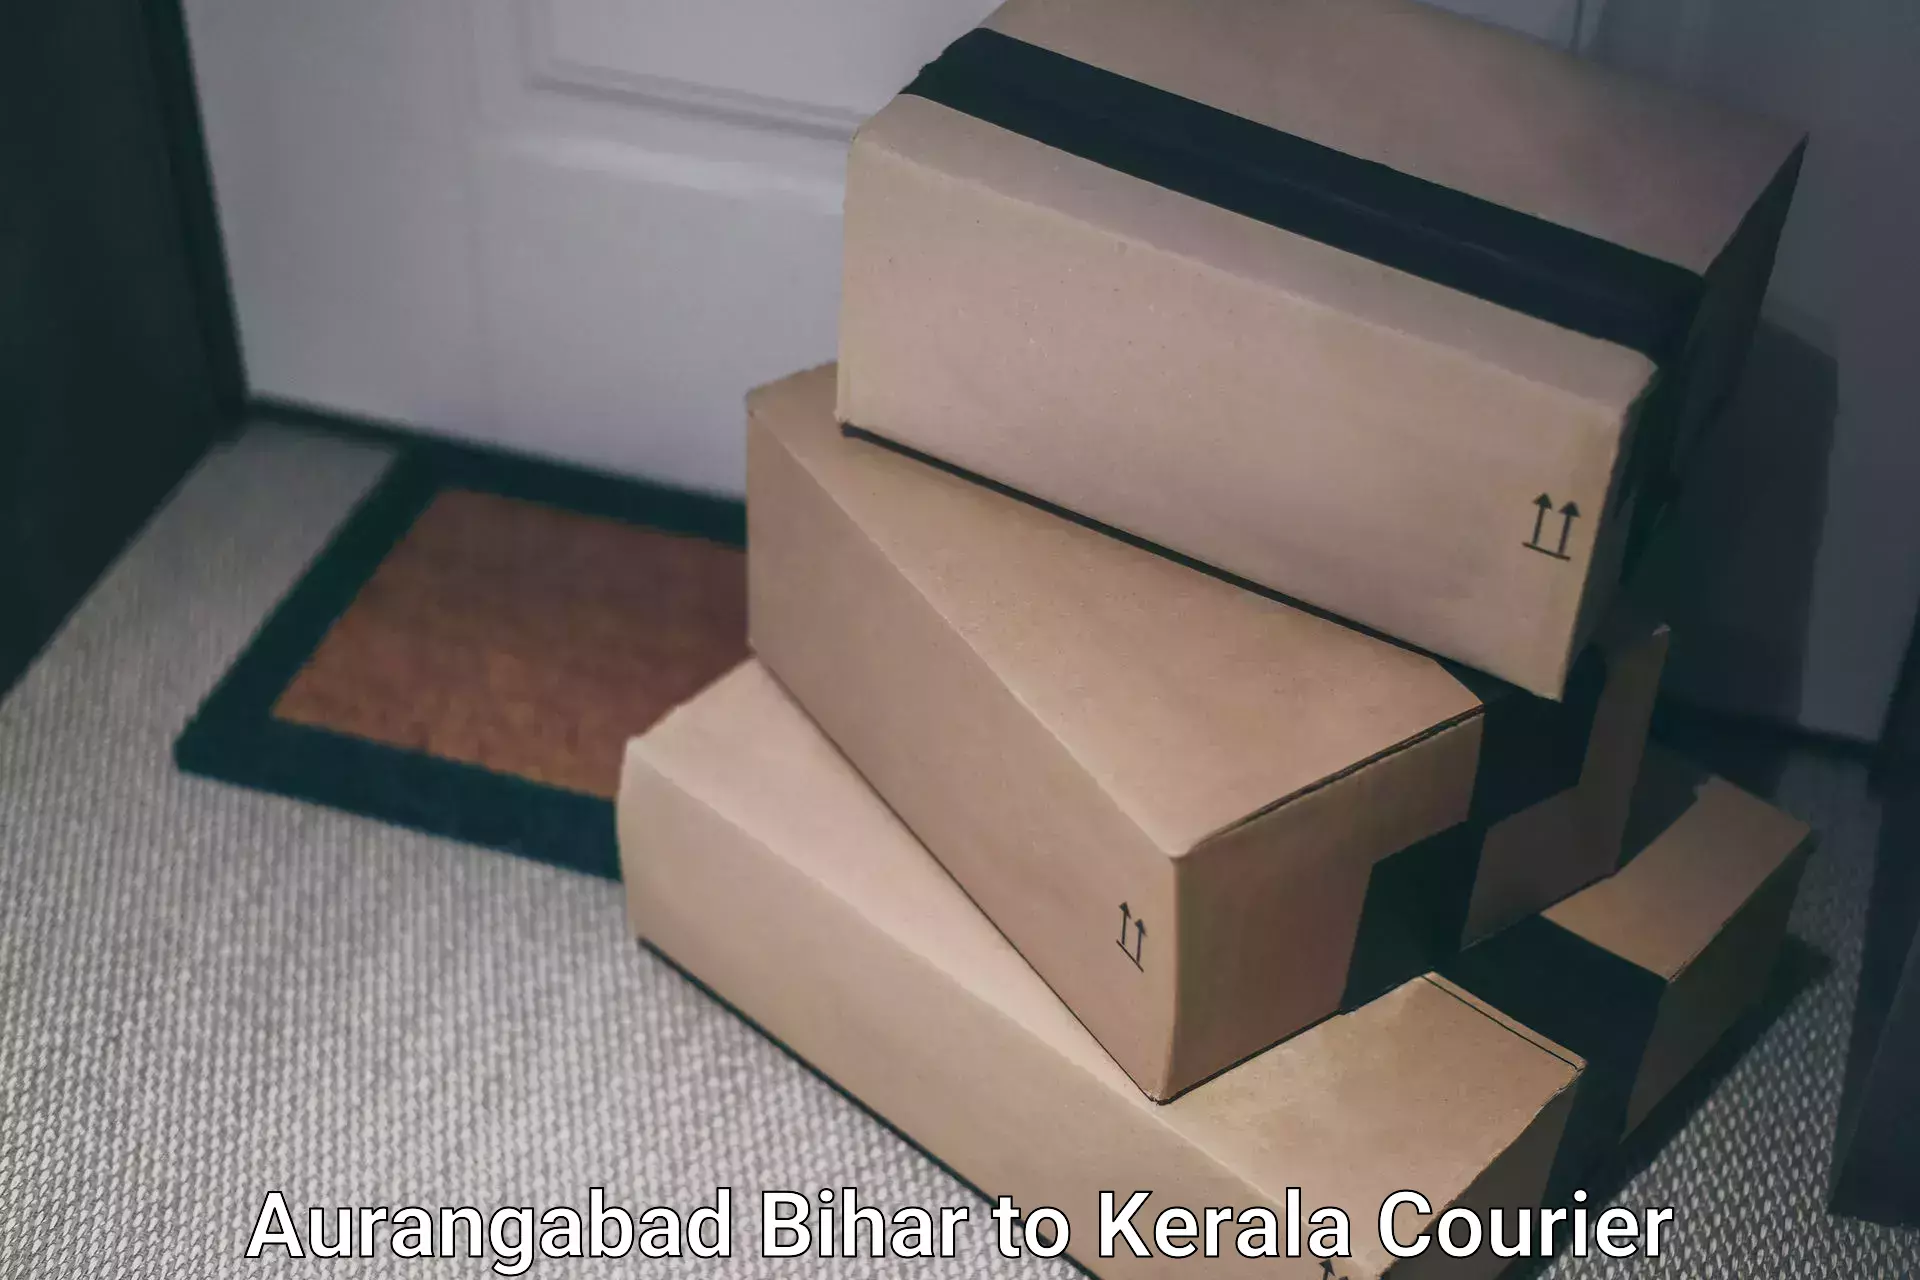 Postal and courier services in Aurangabad Bihar to Kerala